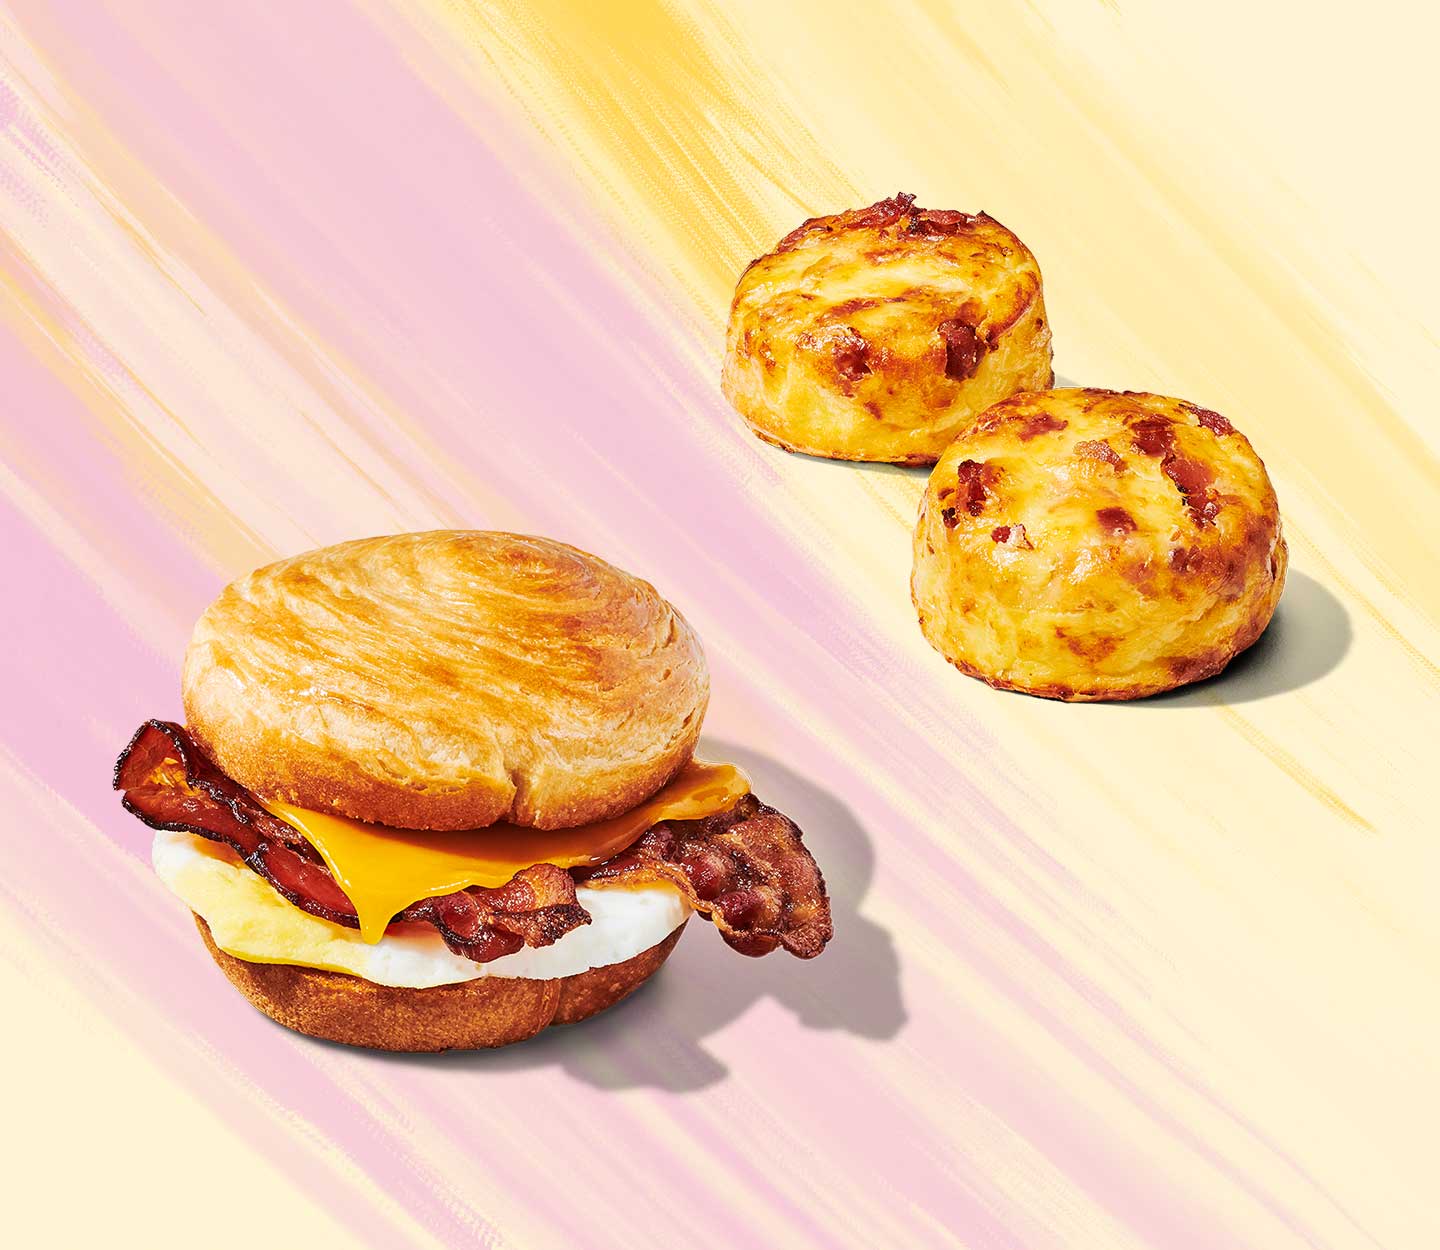 Bacon, cheese and egg sandwiched in a bun next to two round, fluffy egg bites.